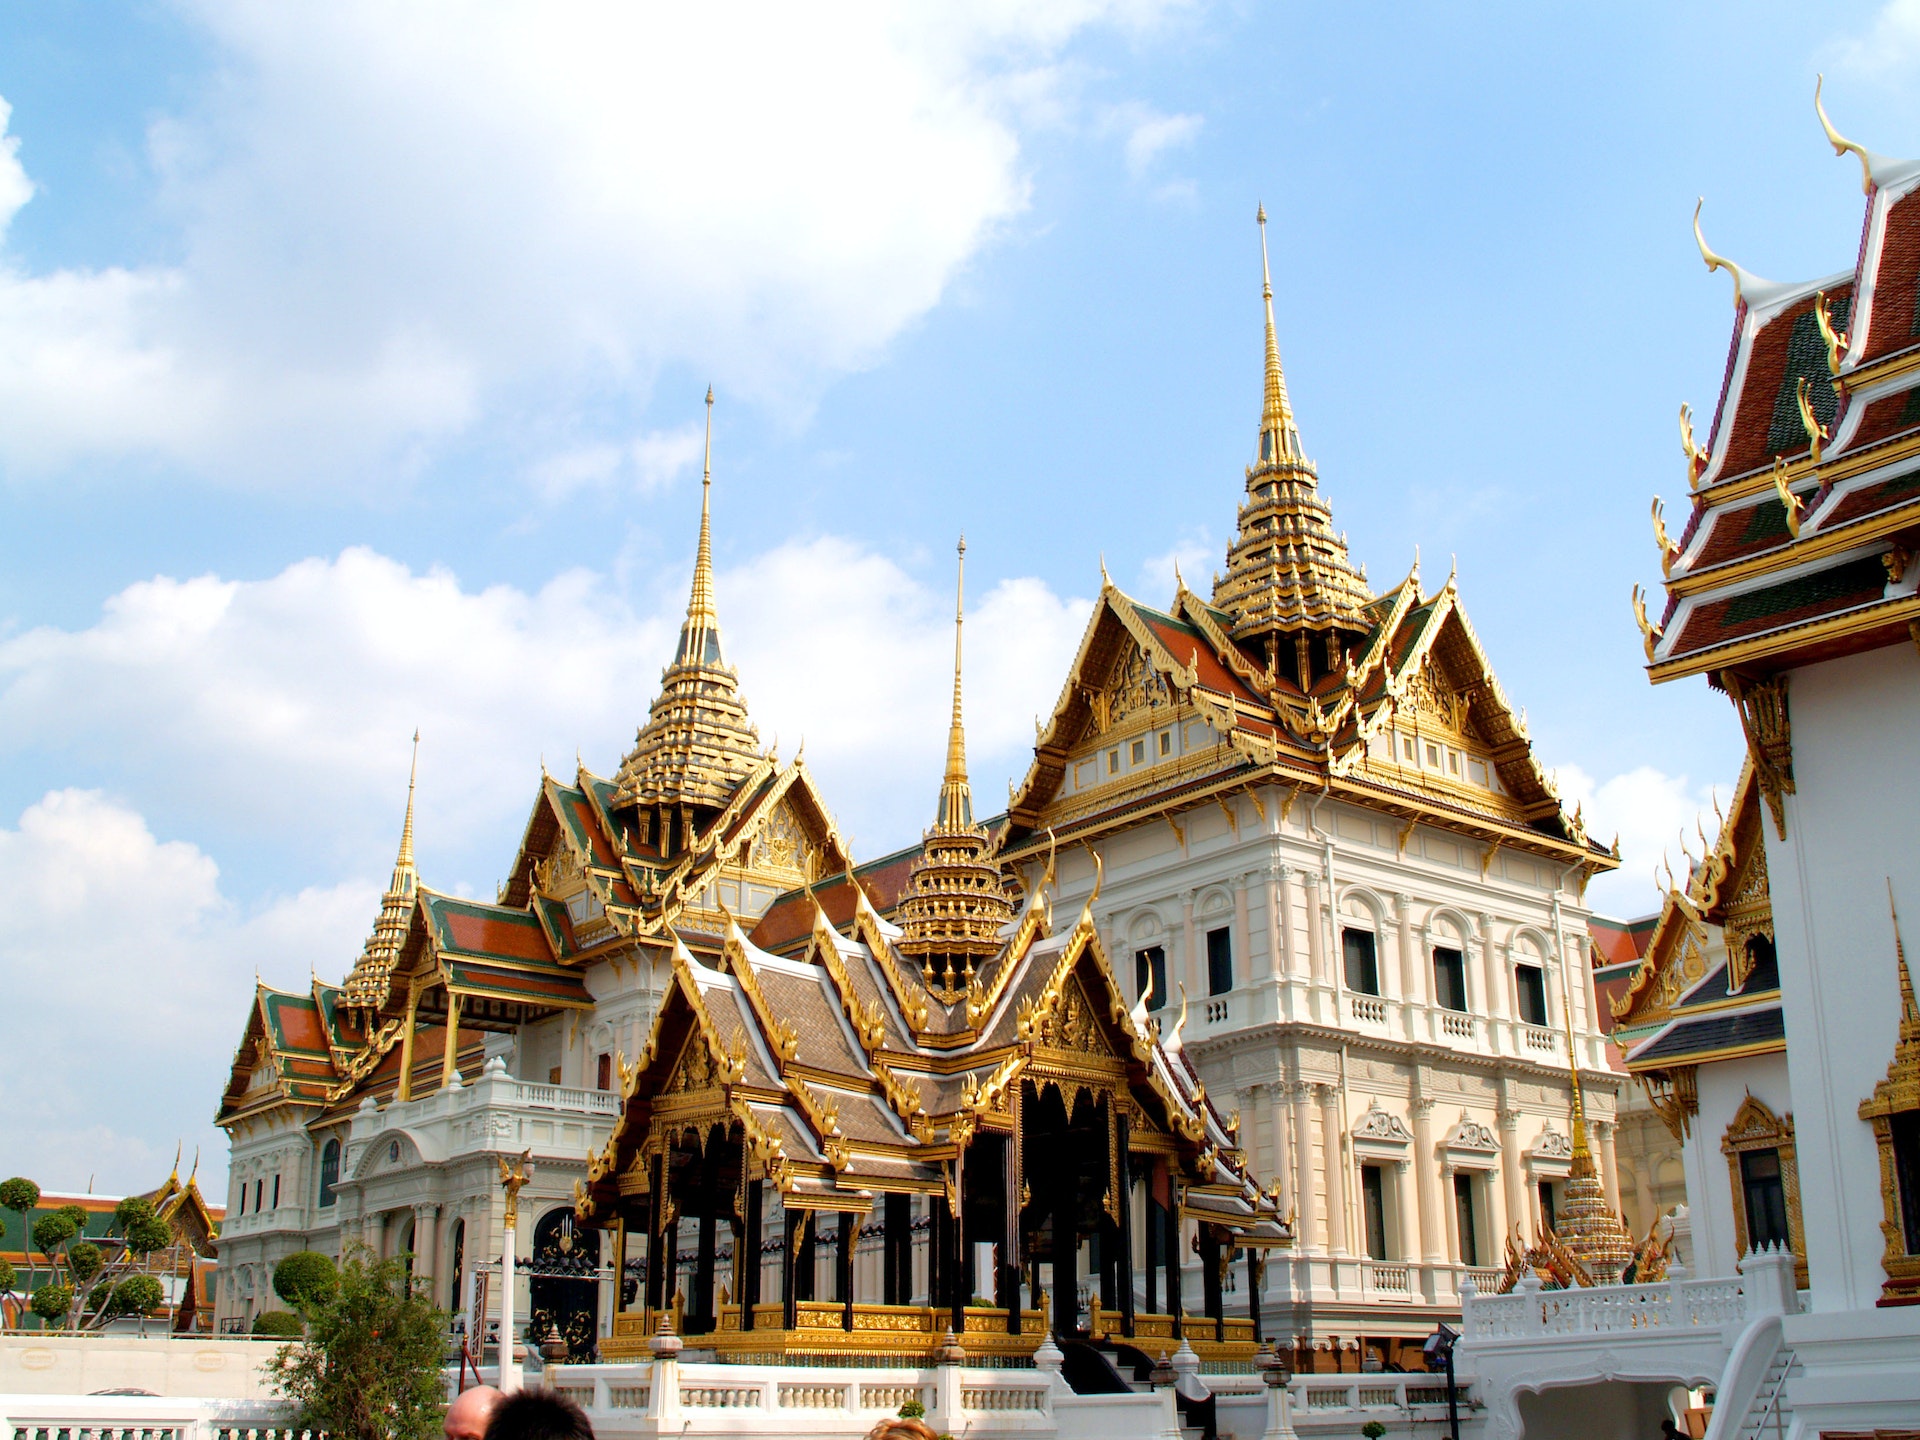 A Spectacular View of the Grand Palace and Wat Phra Kaew